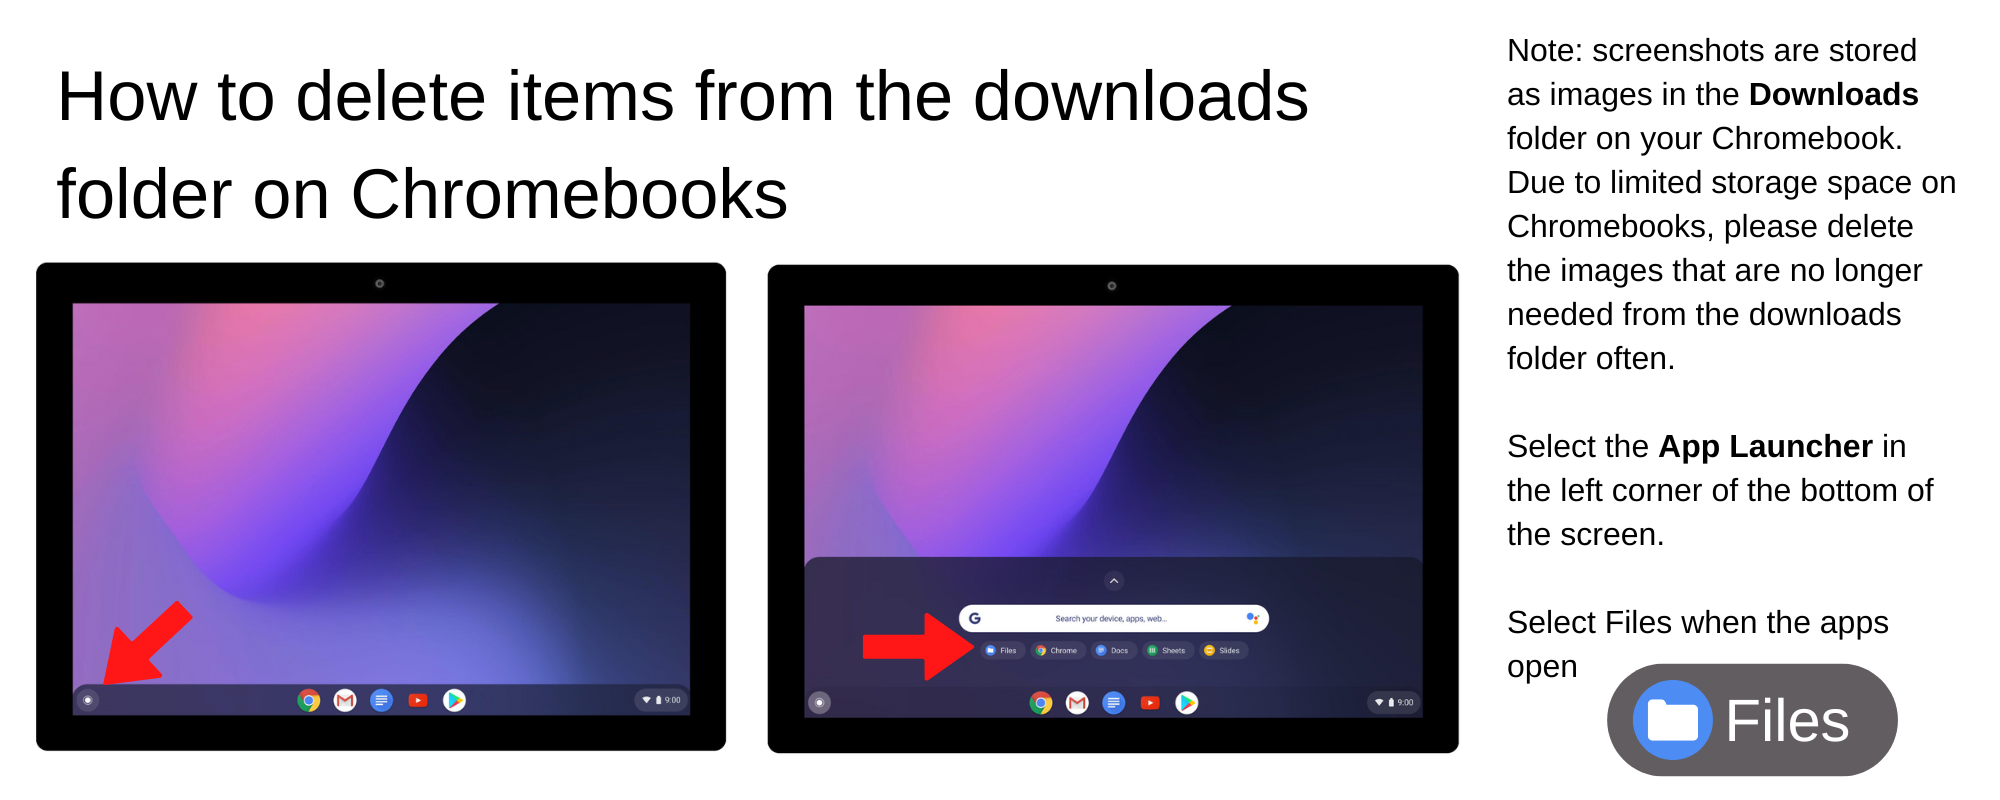 How to delete items from the downloads folder on Chromebooks